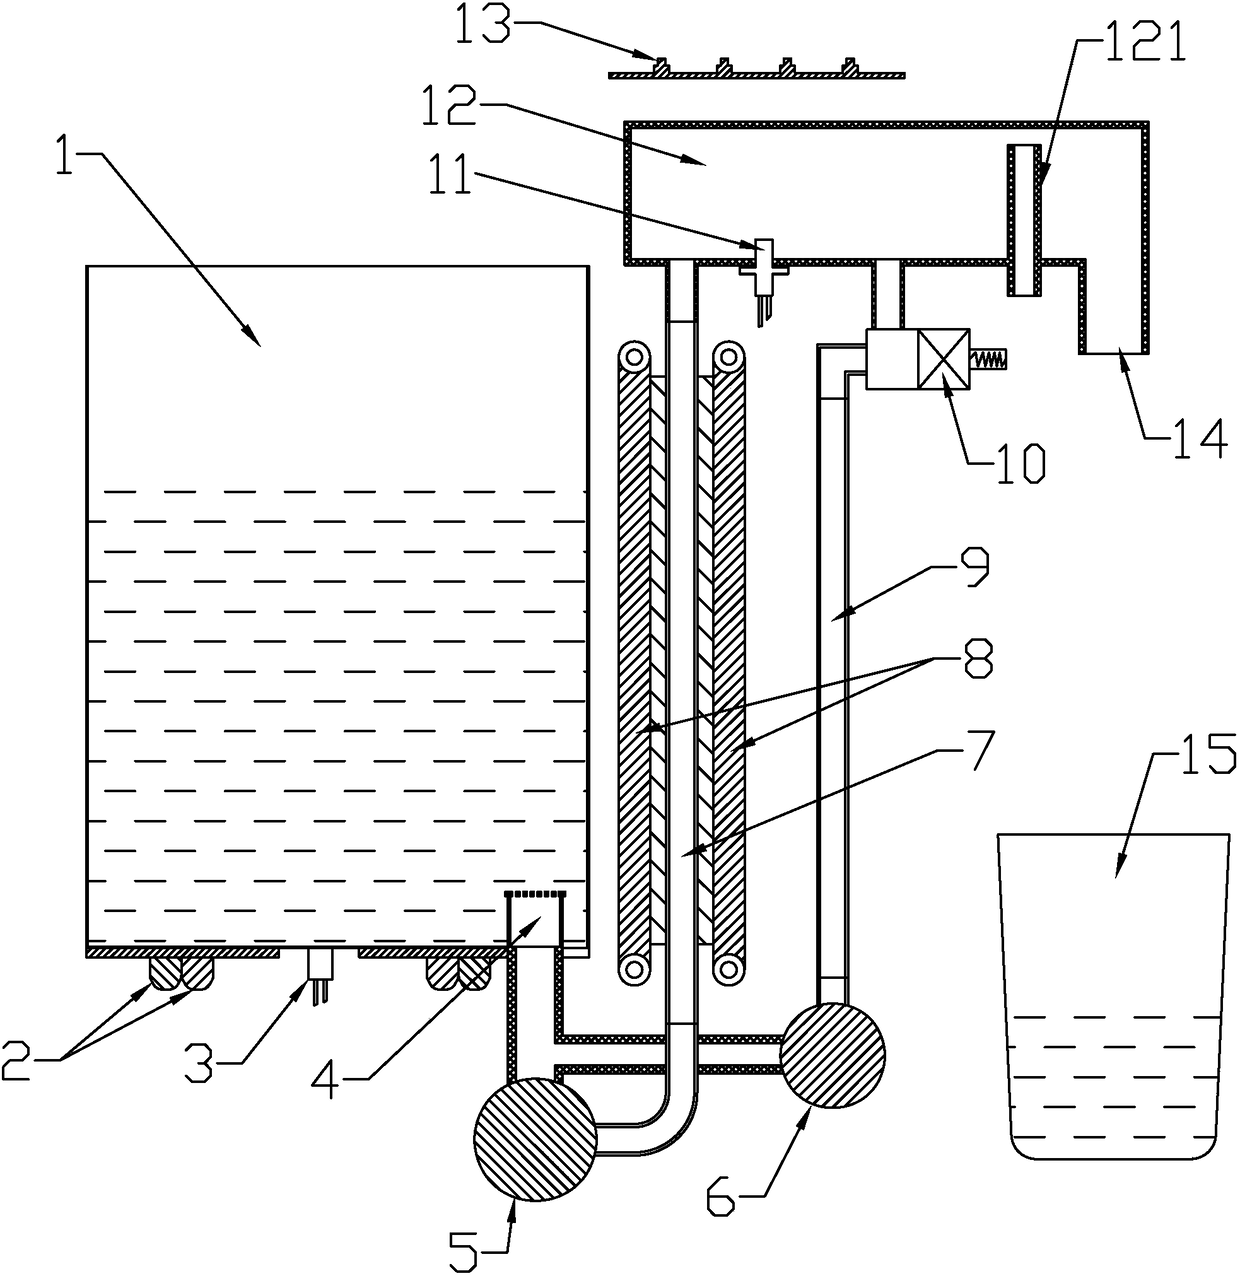 Control method of drinking electric hot water bottle